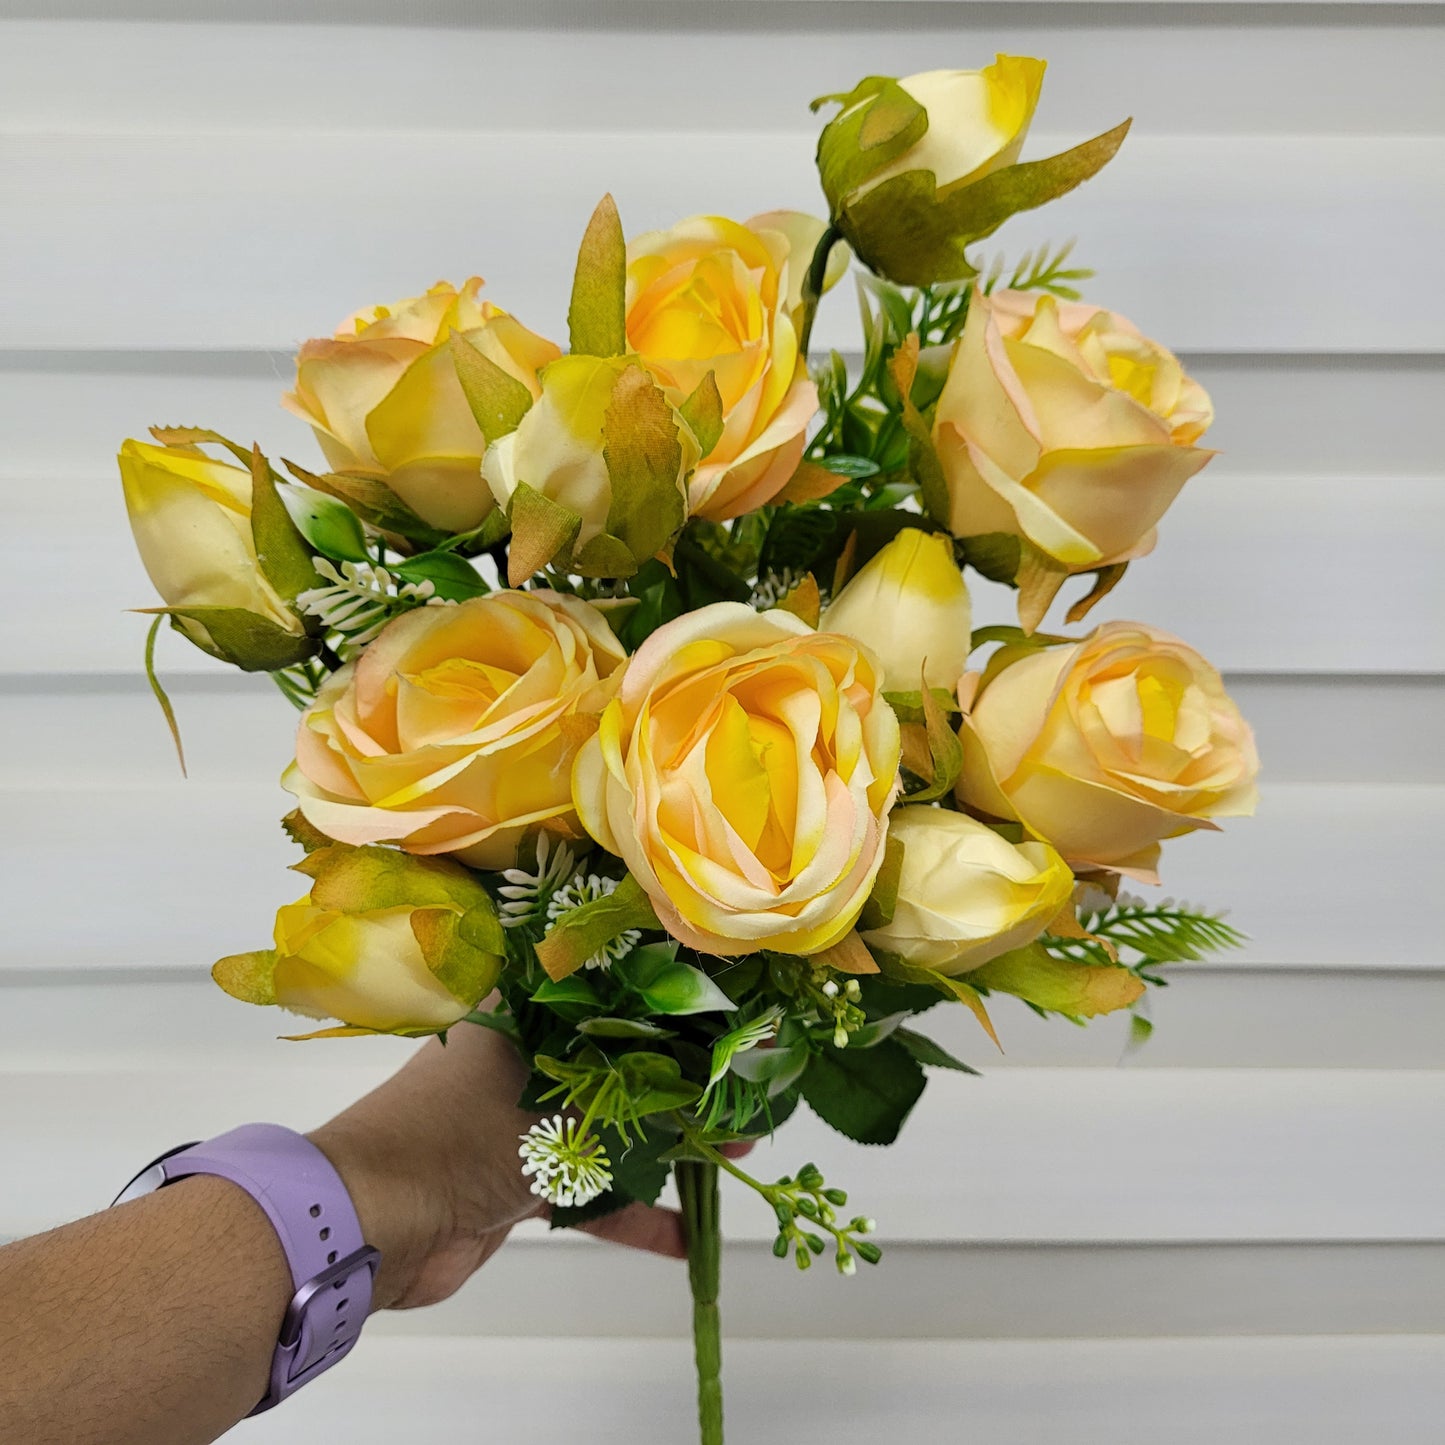 A952 Yellow Rose Bunch (6 Roses & 6 Buds With Fillers)